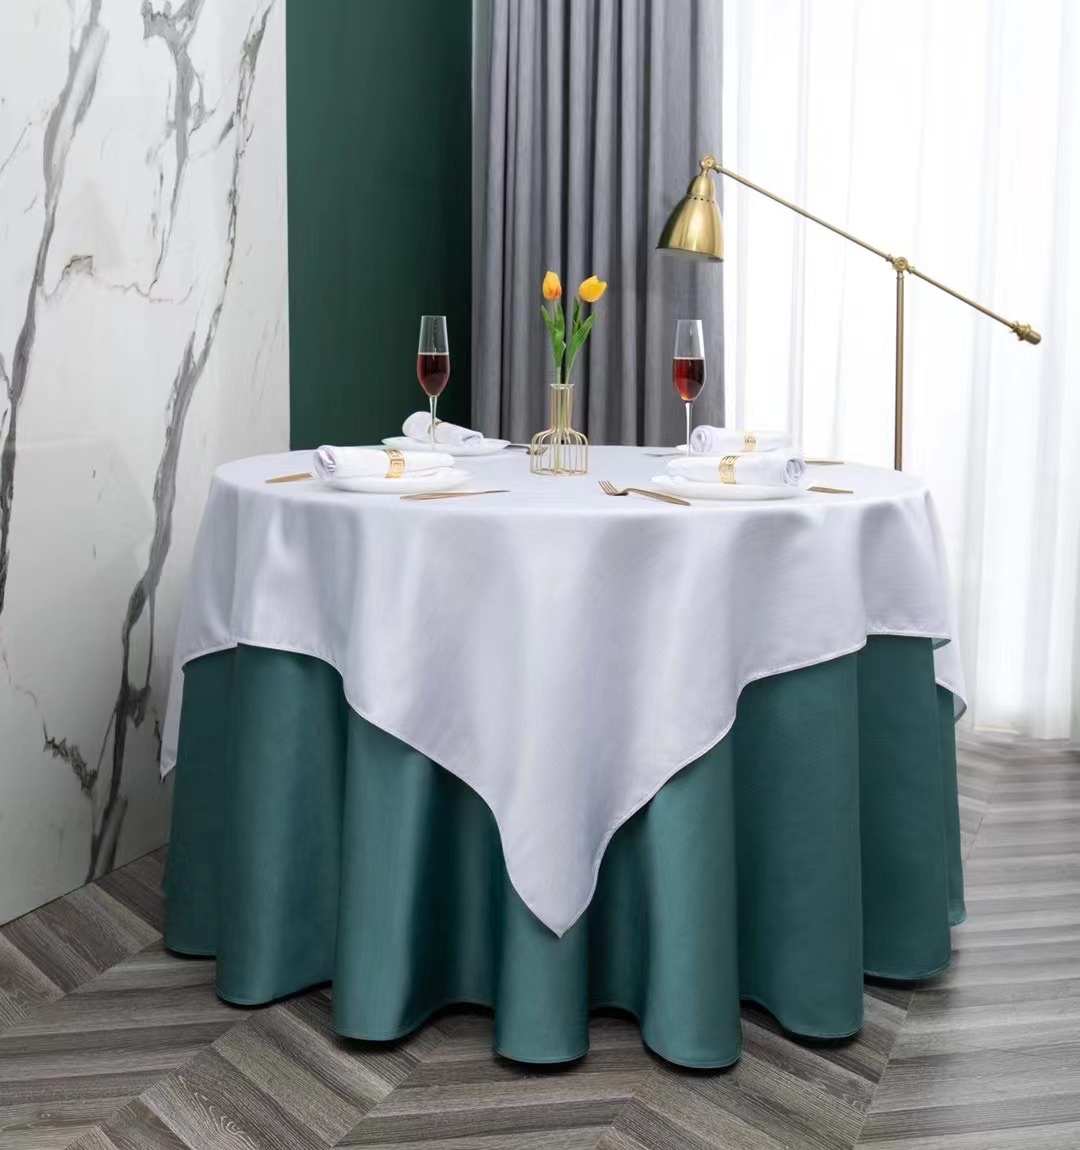 Nicefoto Hotel Supplies Hotel Tablecloth High-End Hotel Tablecloth